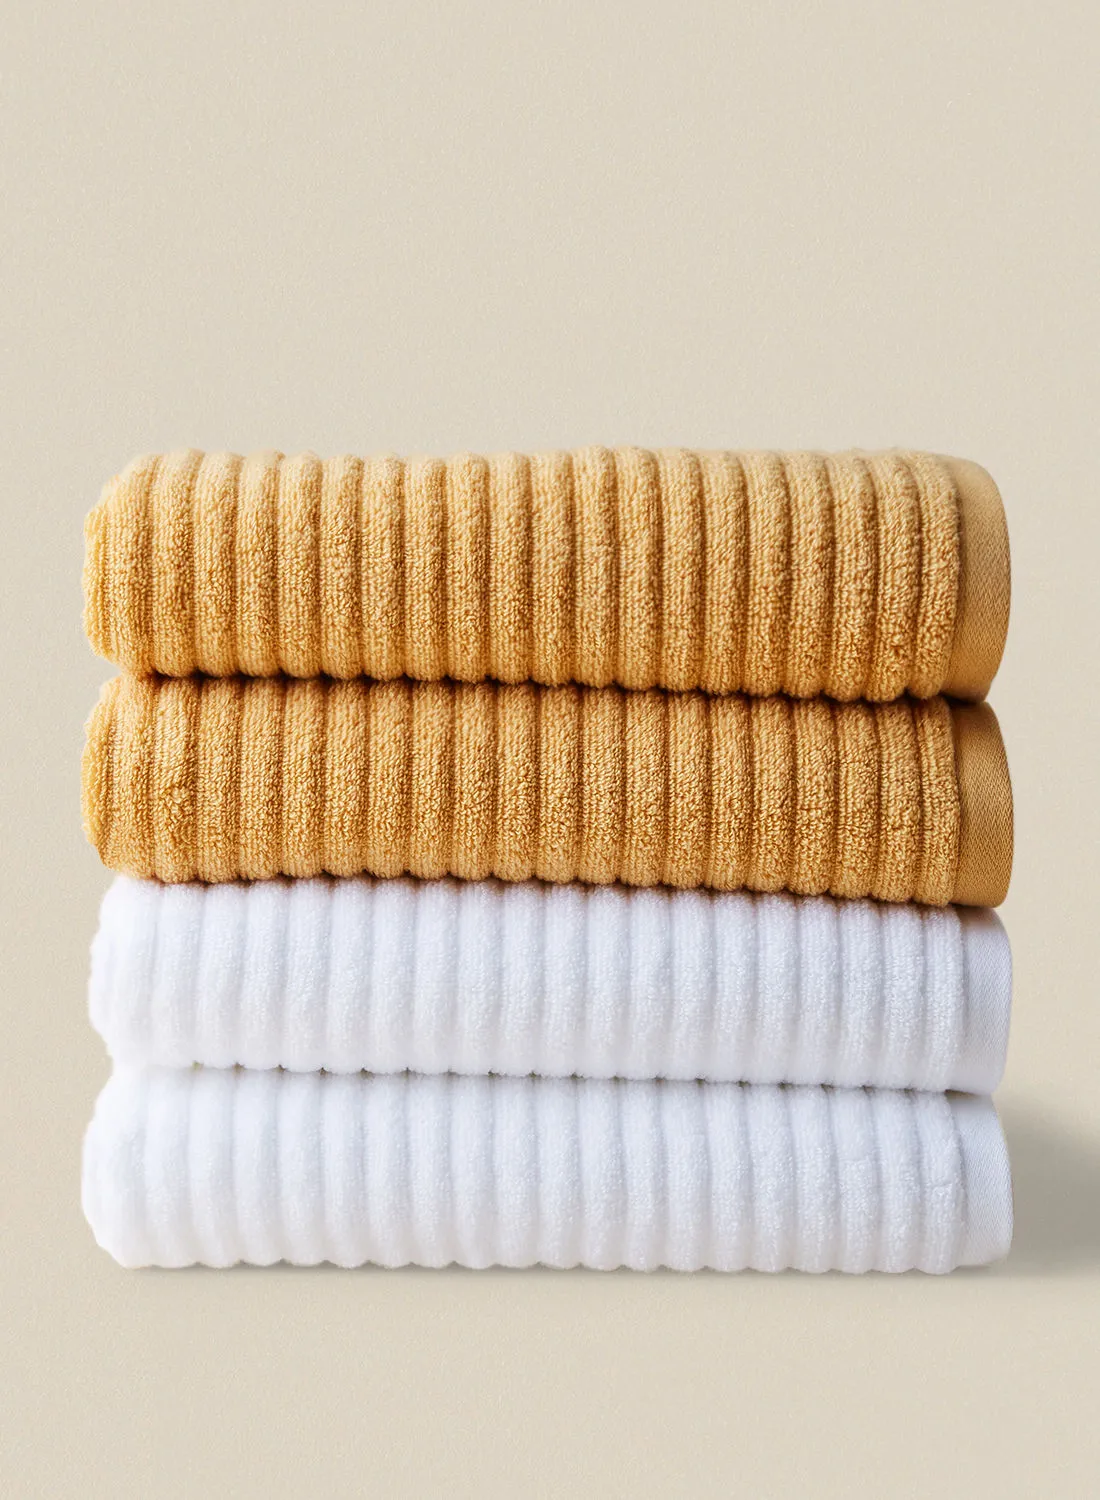 noon east 4 Piece Bathroom Towel Set - 450 GSM 100% Cotton Ribbed - 4 Bath Towel - Multicolor Gold/White Color - Highly Absorbent - Fast Dry